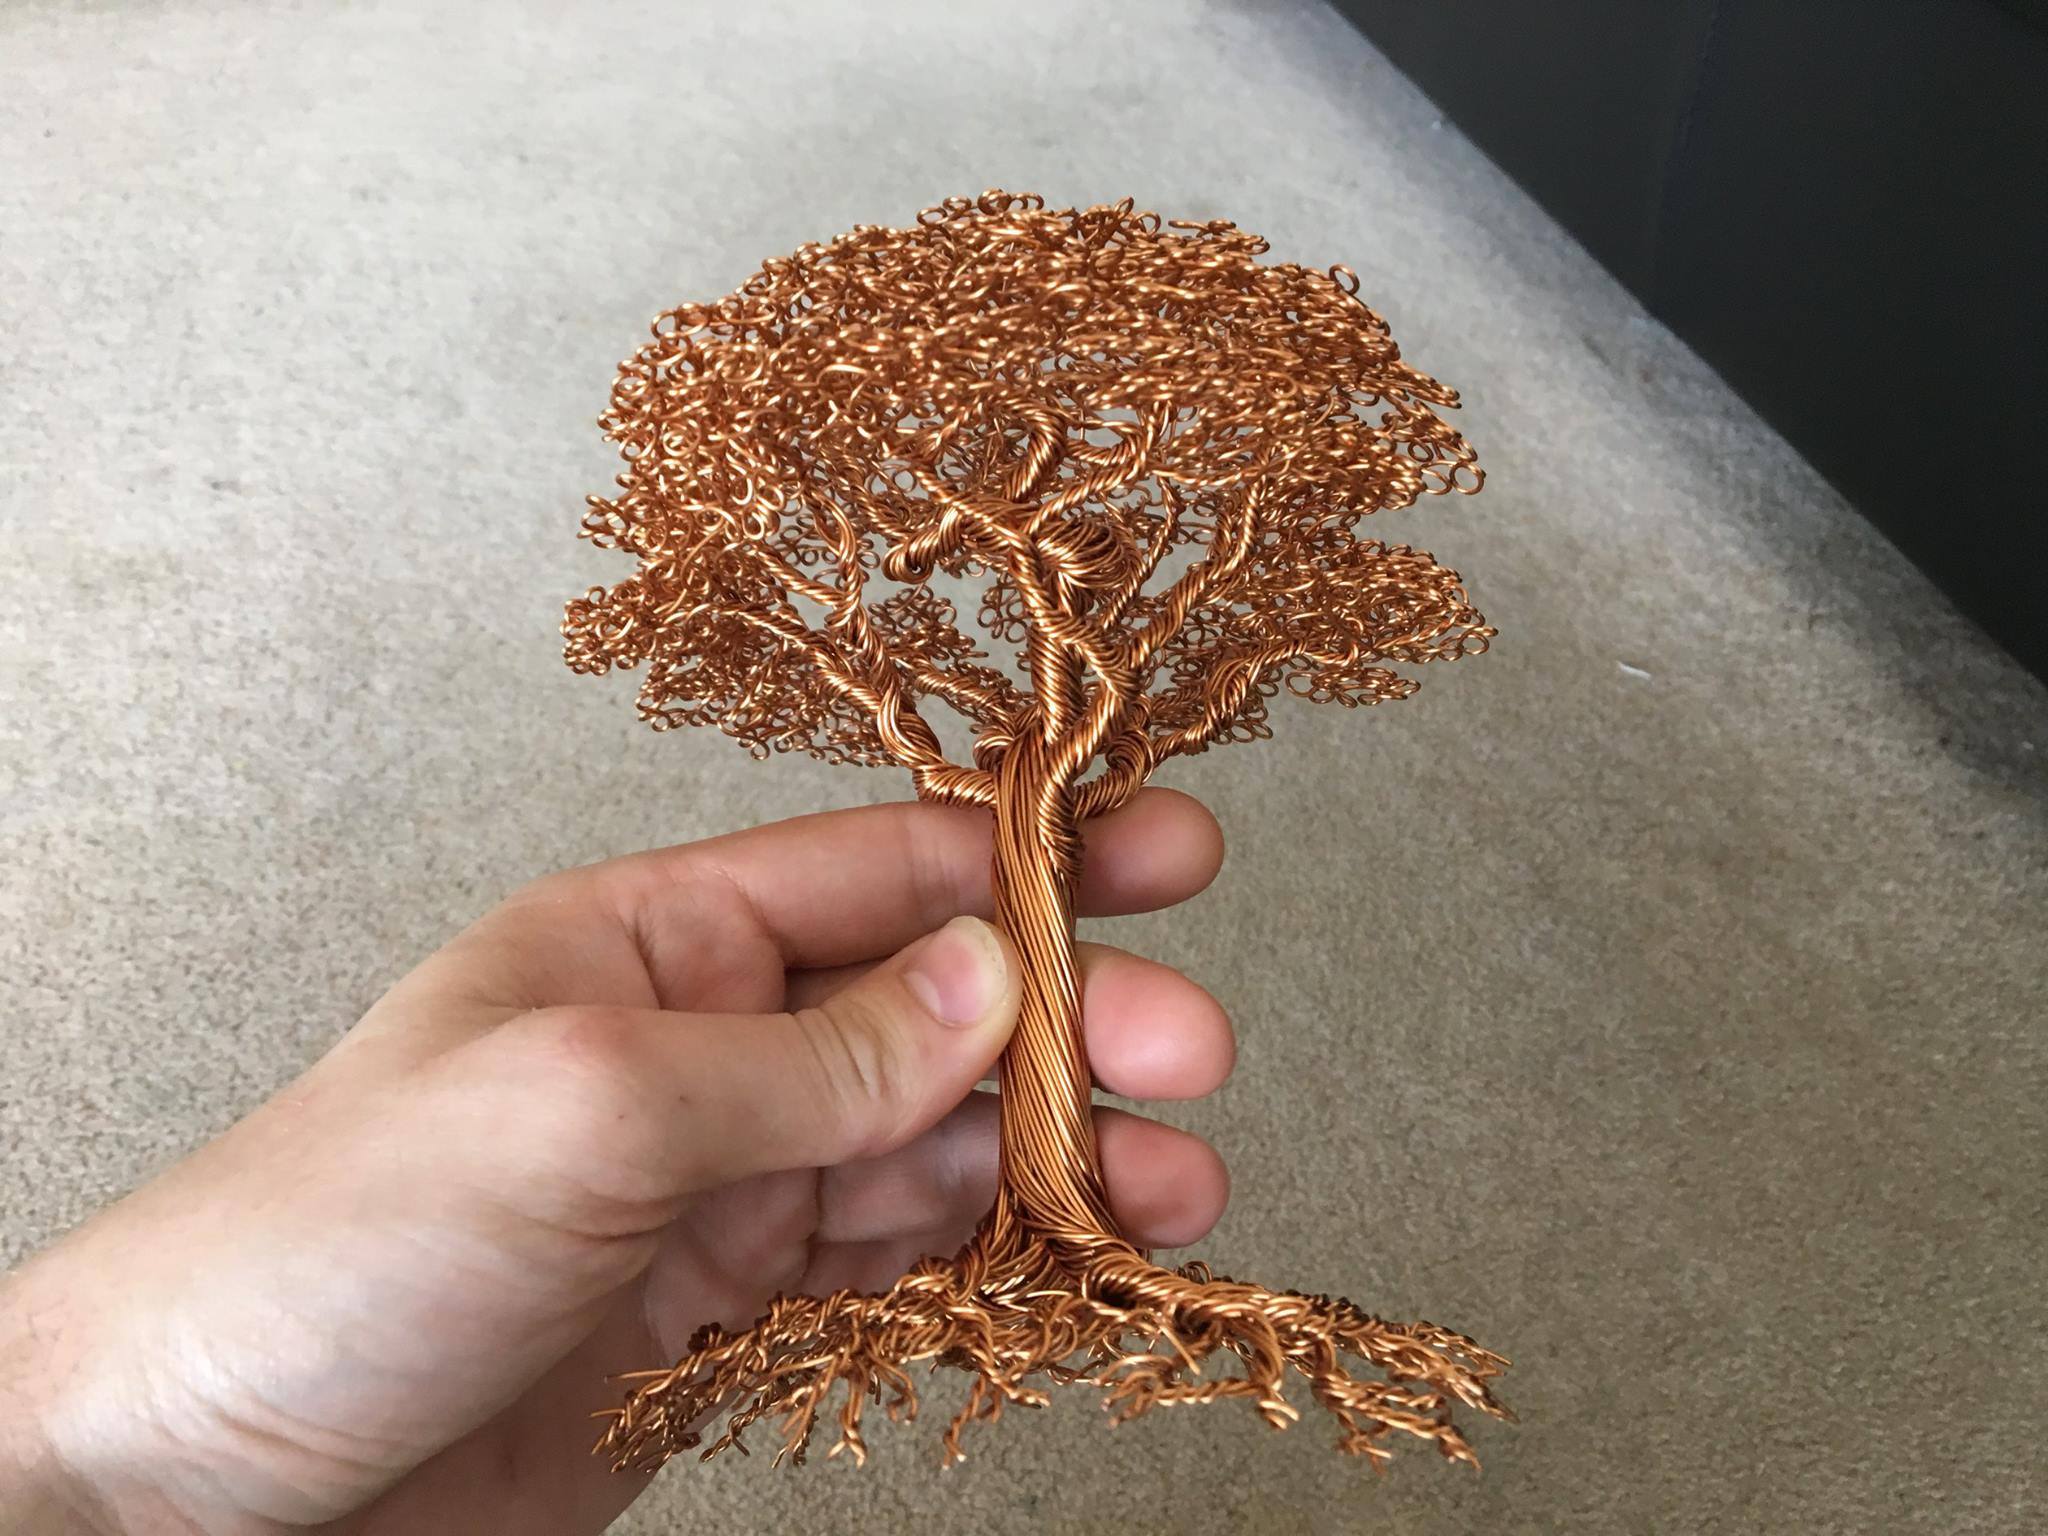 Artist Weaves Intricate Bonsai Trees With Copper And Aluminum Wire